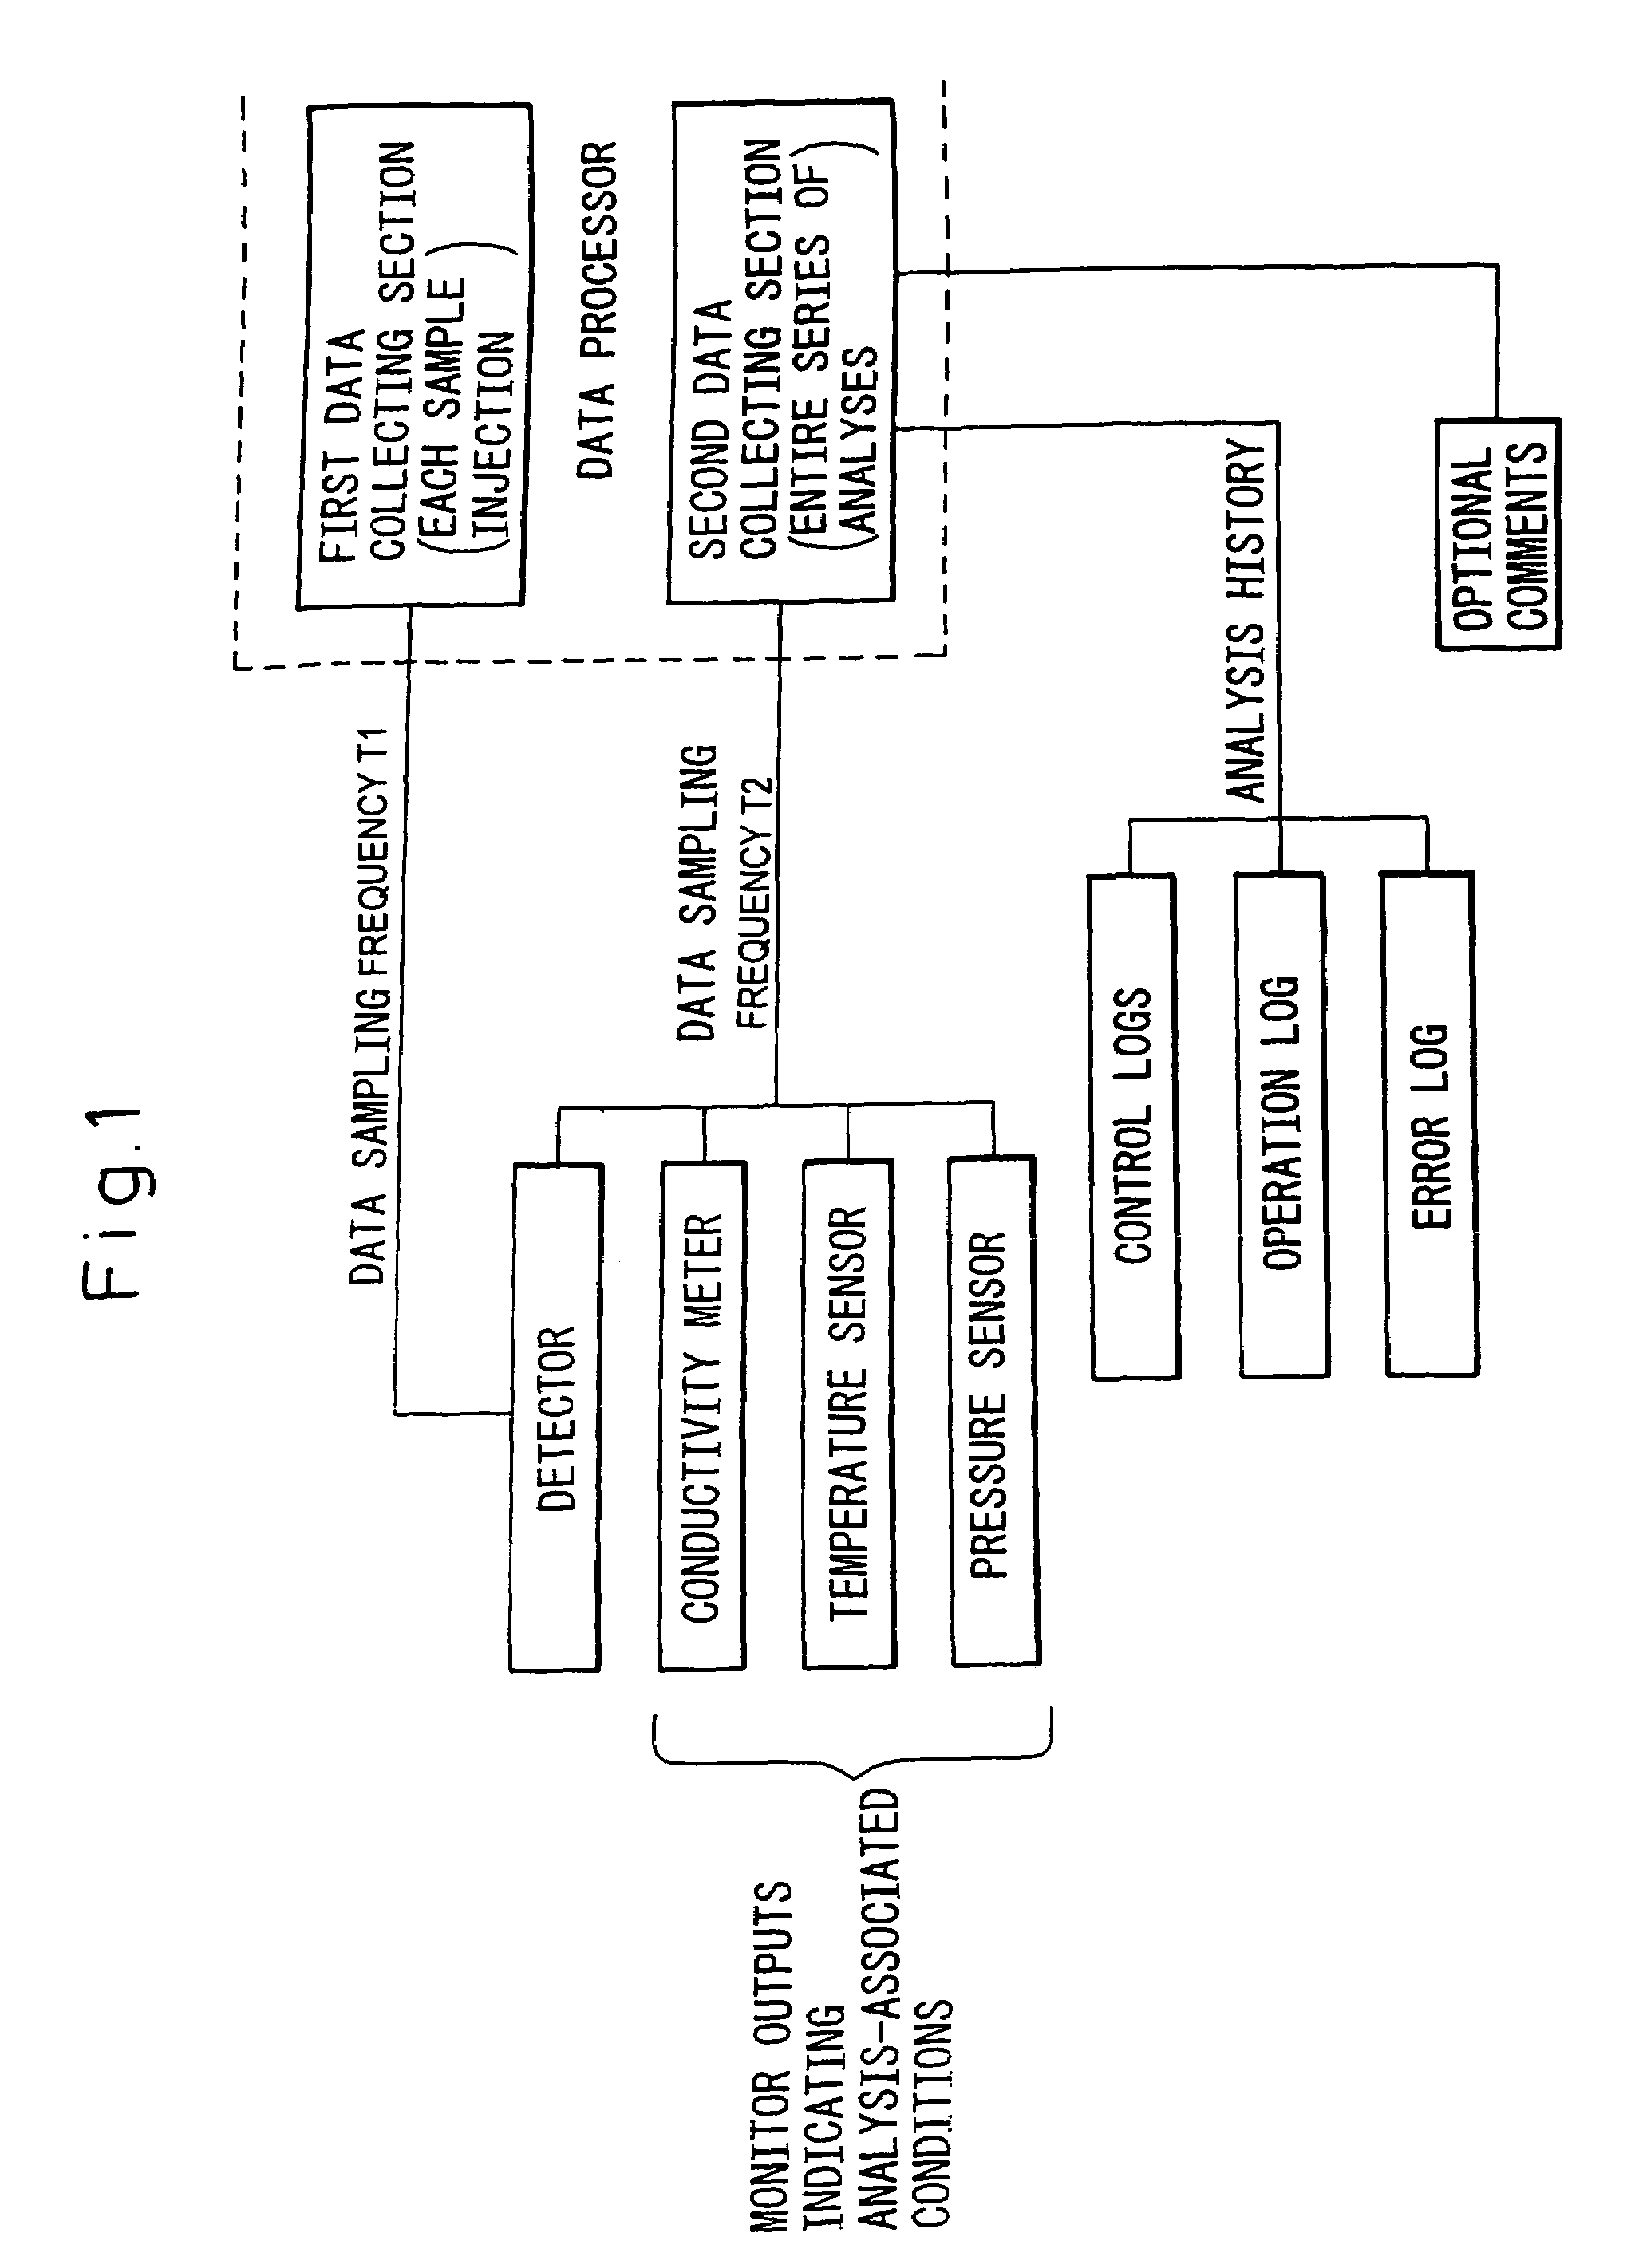 Data processor for use in chromatographic analysis